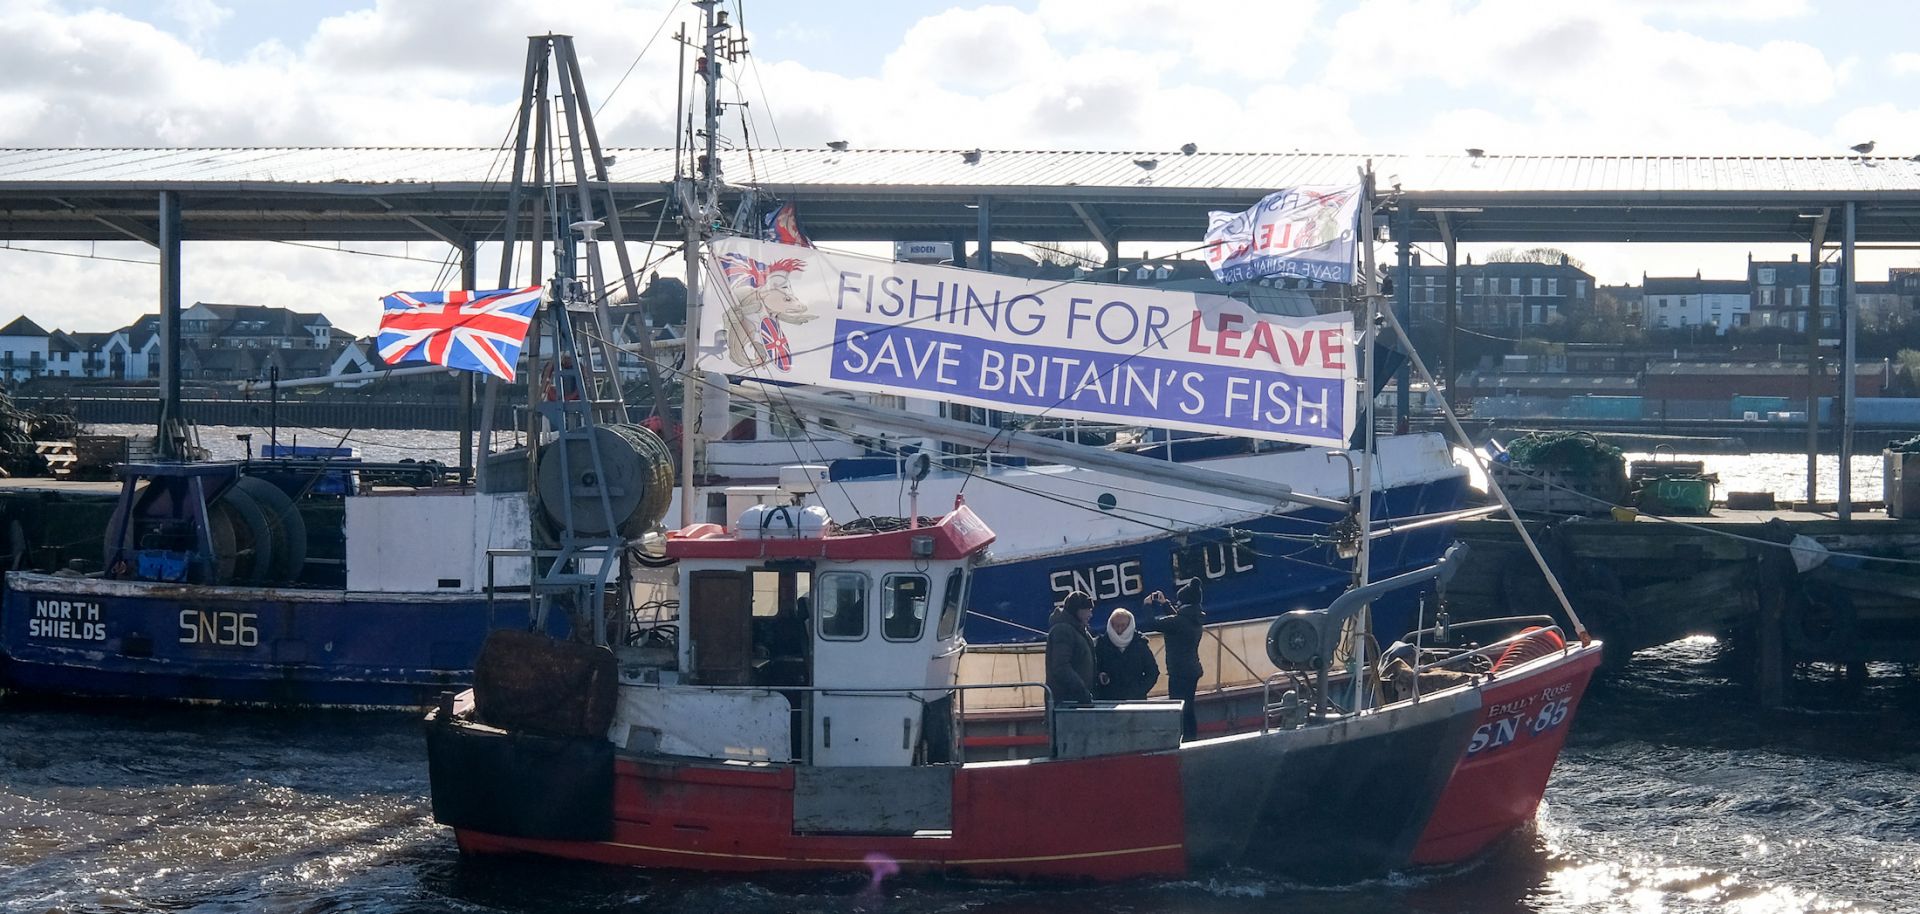 Fishing boats waving pro-Brexit flags sail up the River Tyne on March 15, 2019, in North Shields, United Kingdom. 